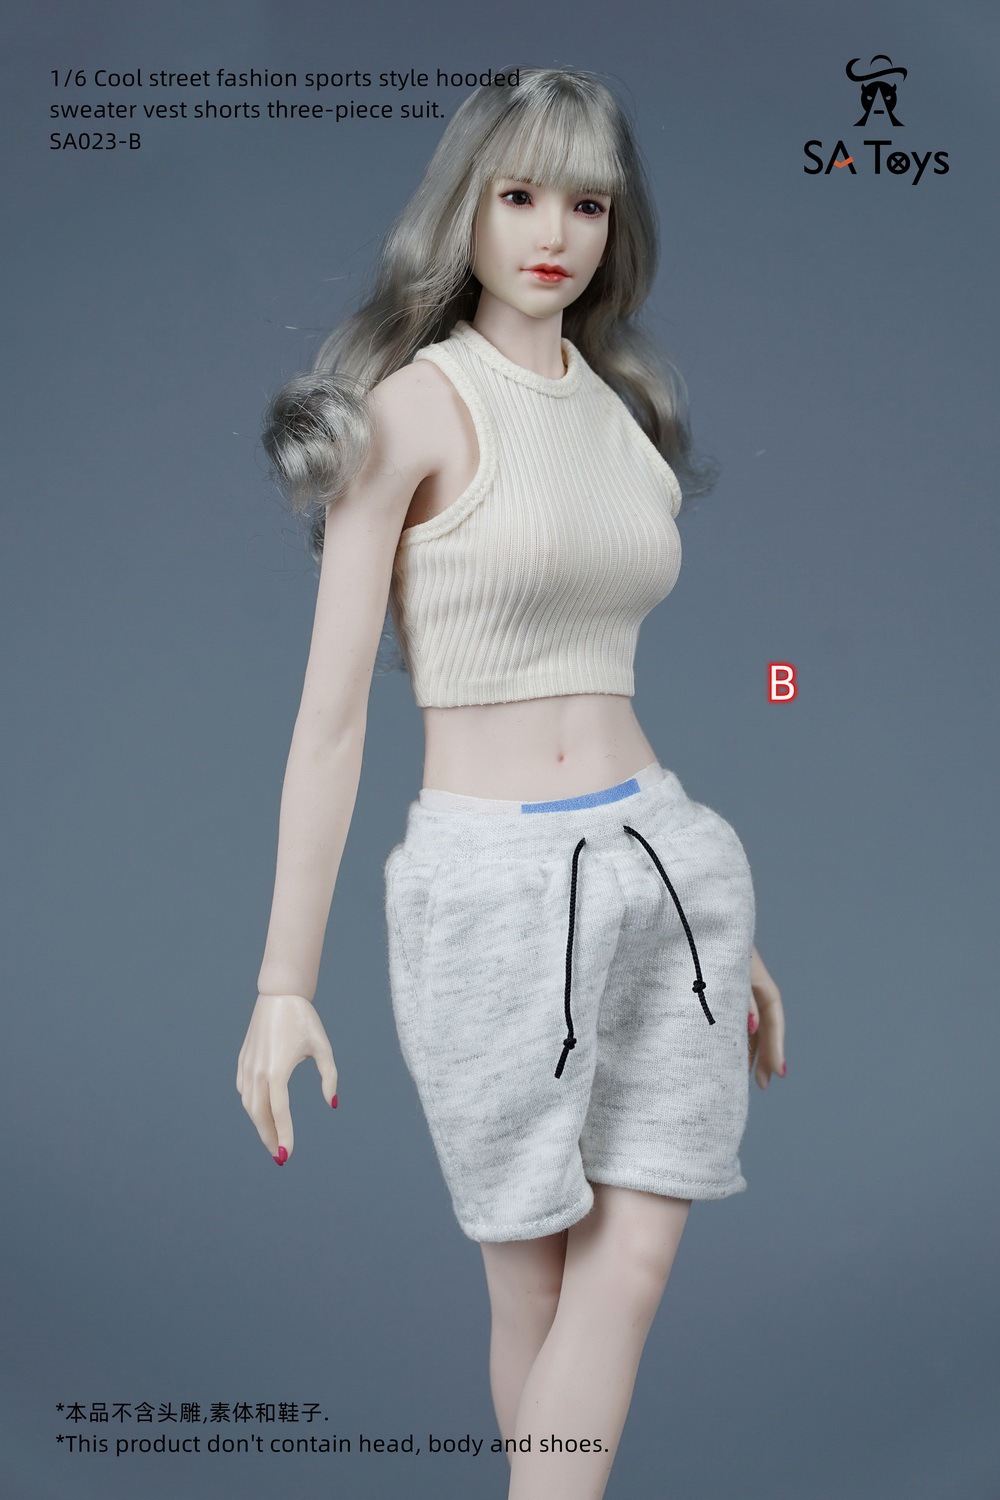 fashionablesportshoody - NEW PRODUCT: SA Toys: 1/6 hip skirt / floral elastic skirt / fashionable sports style hooded sweater cover, hip-hop fisherman hat halter and footwear casual pants [variety optional] 17020112